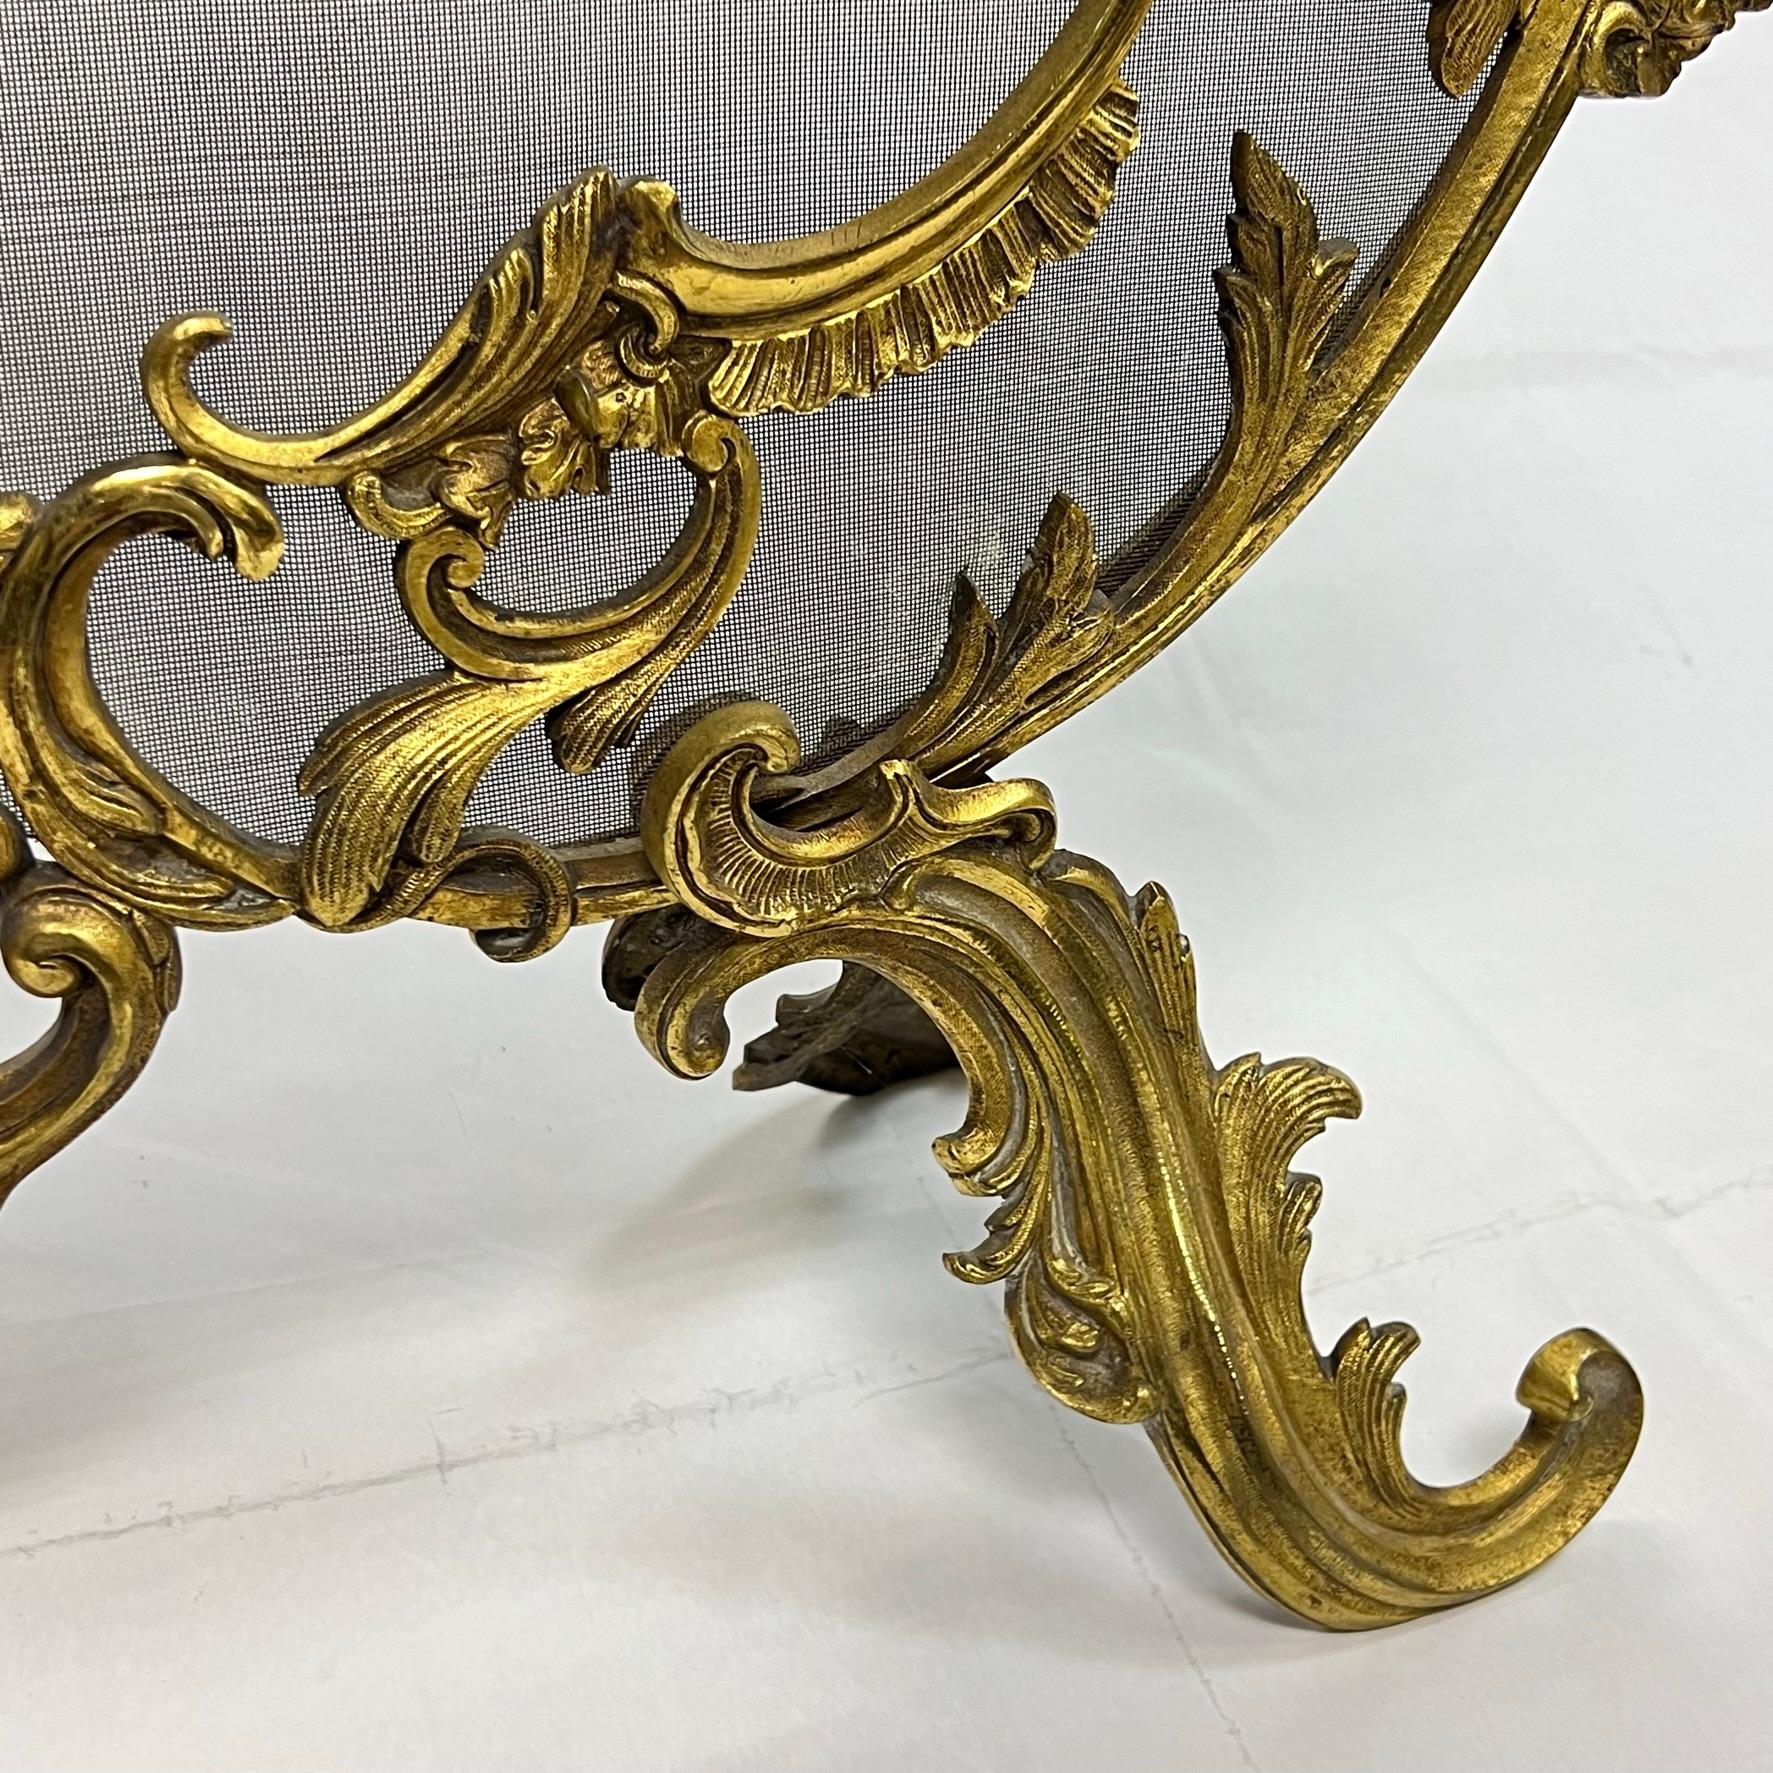 19th Century French Gilt Bronze Fireplace Screen in French Louis XV / XVI Style For Sale 5